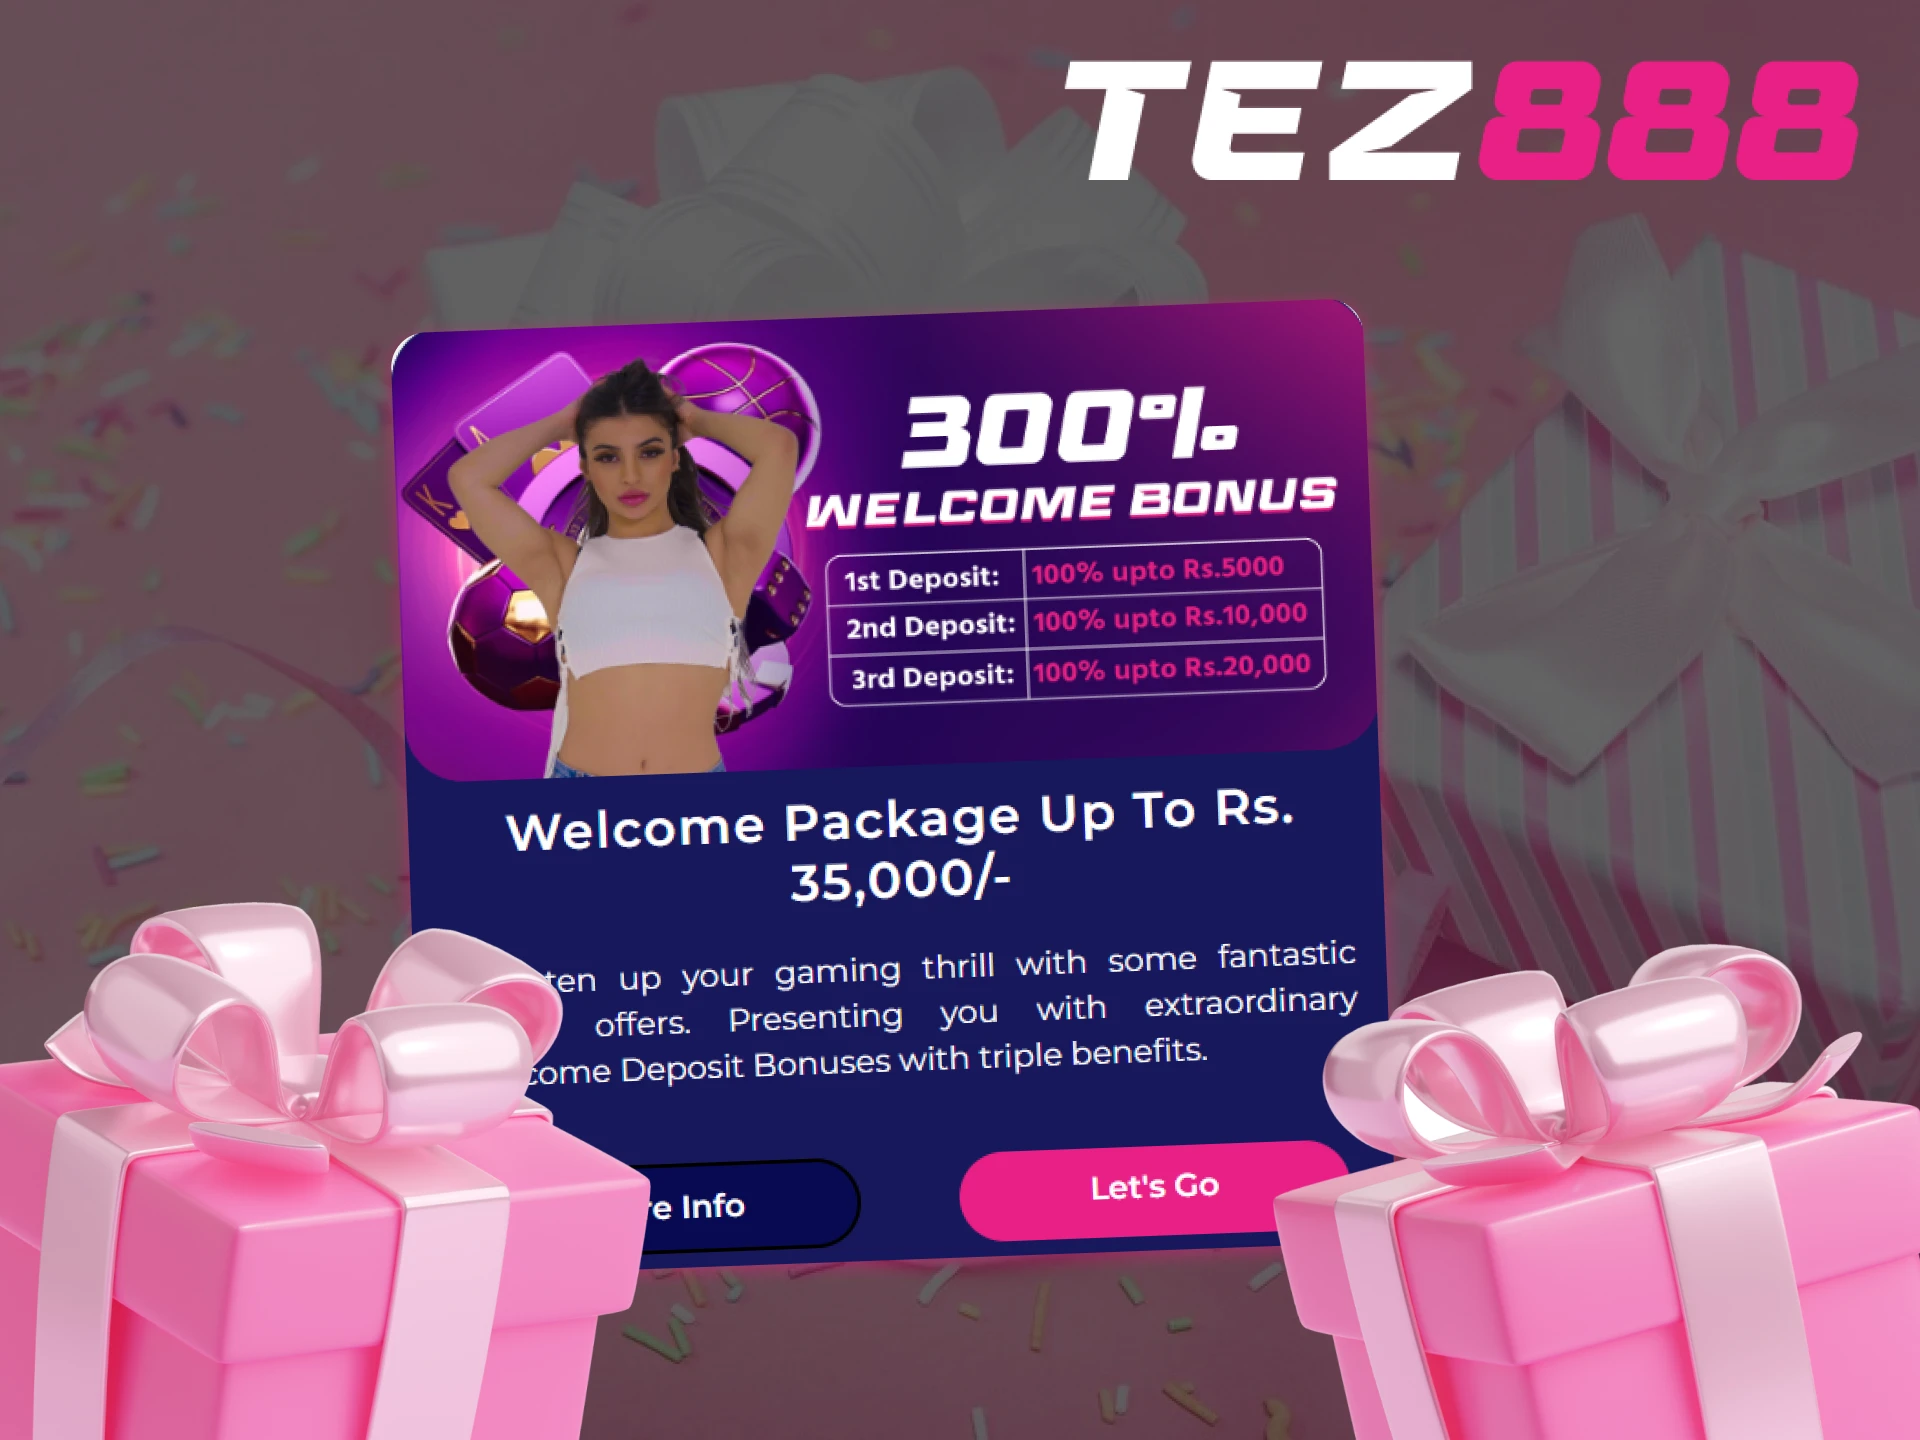 Tez888 offers a good bonus for the first few deposits after registration.